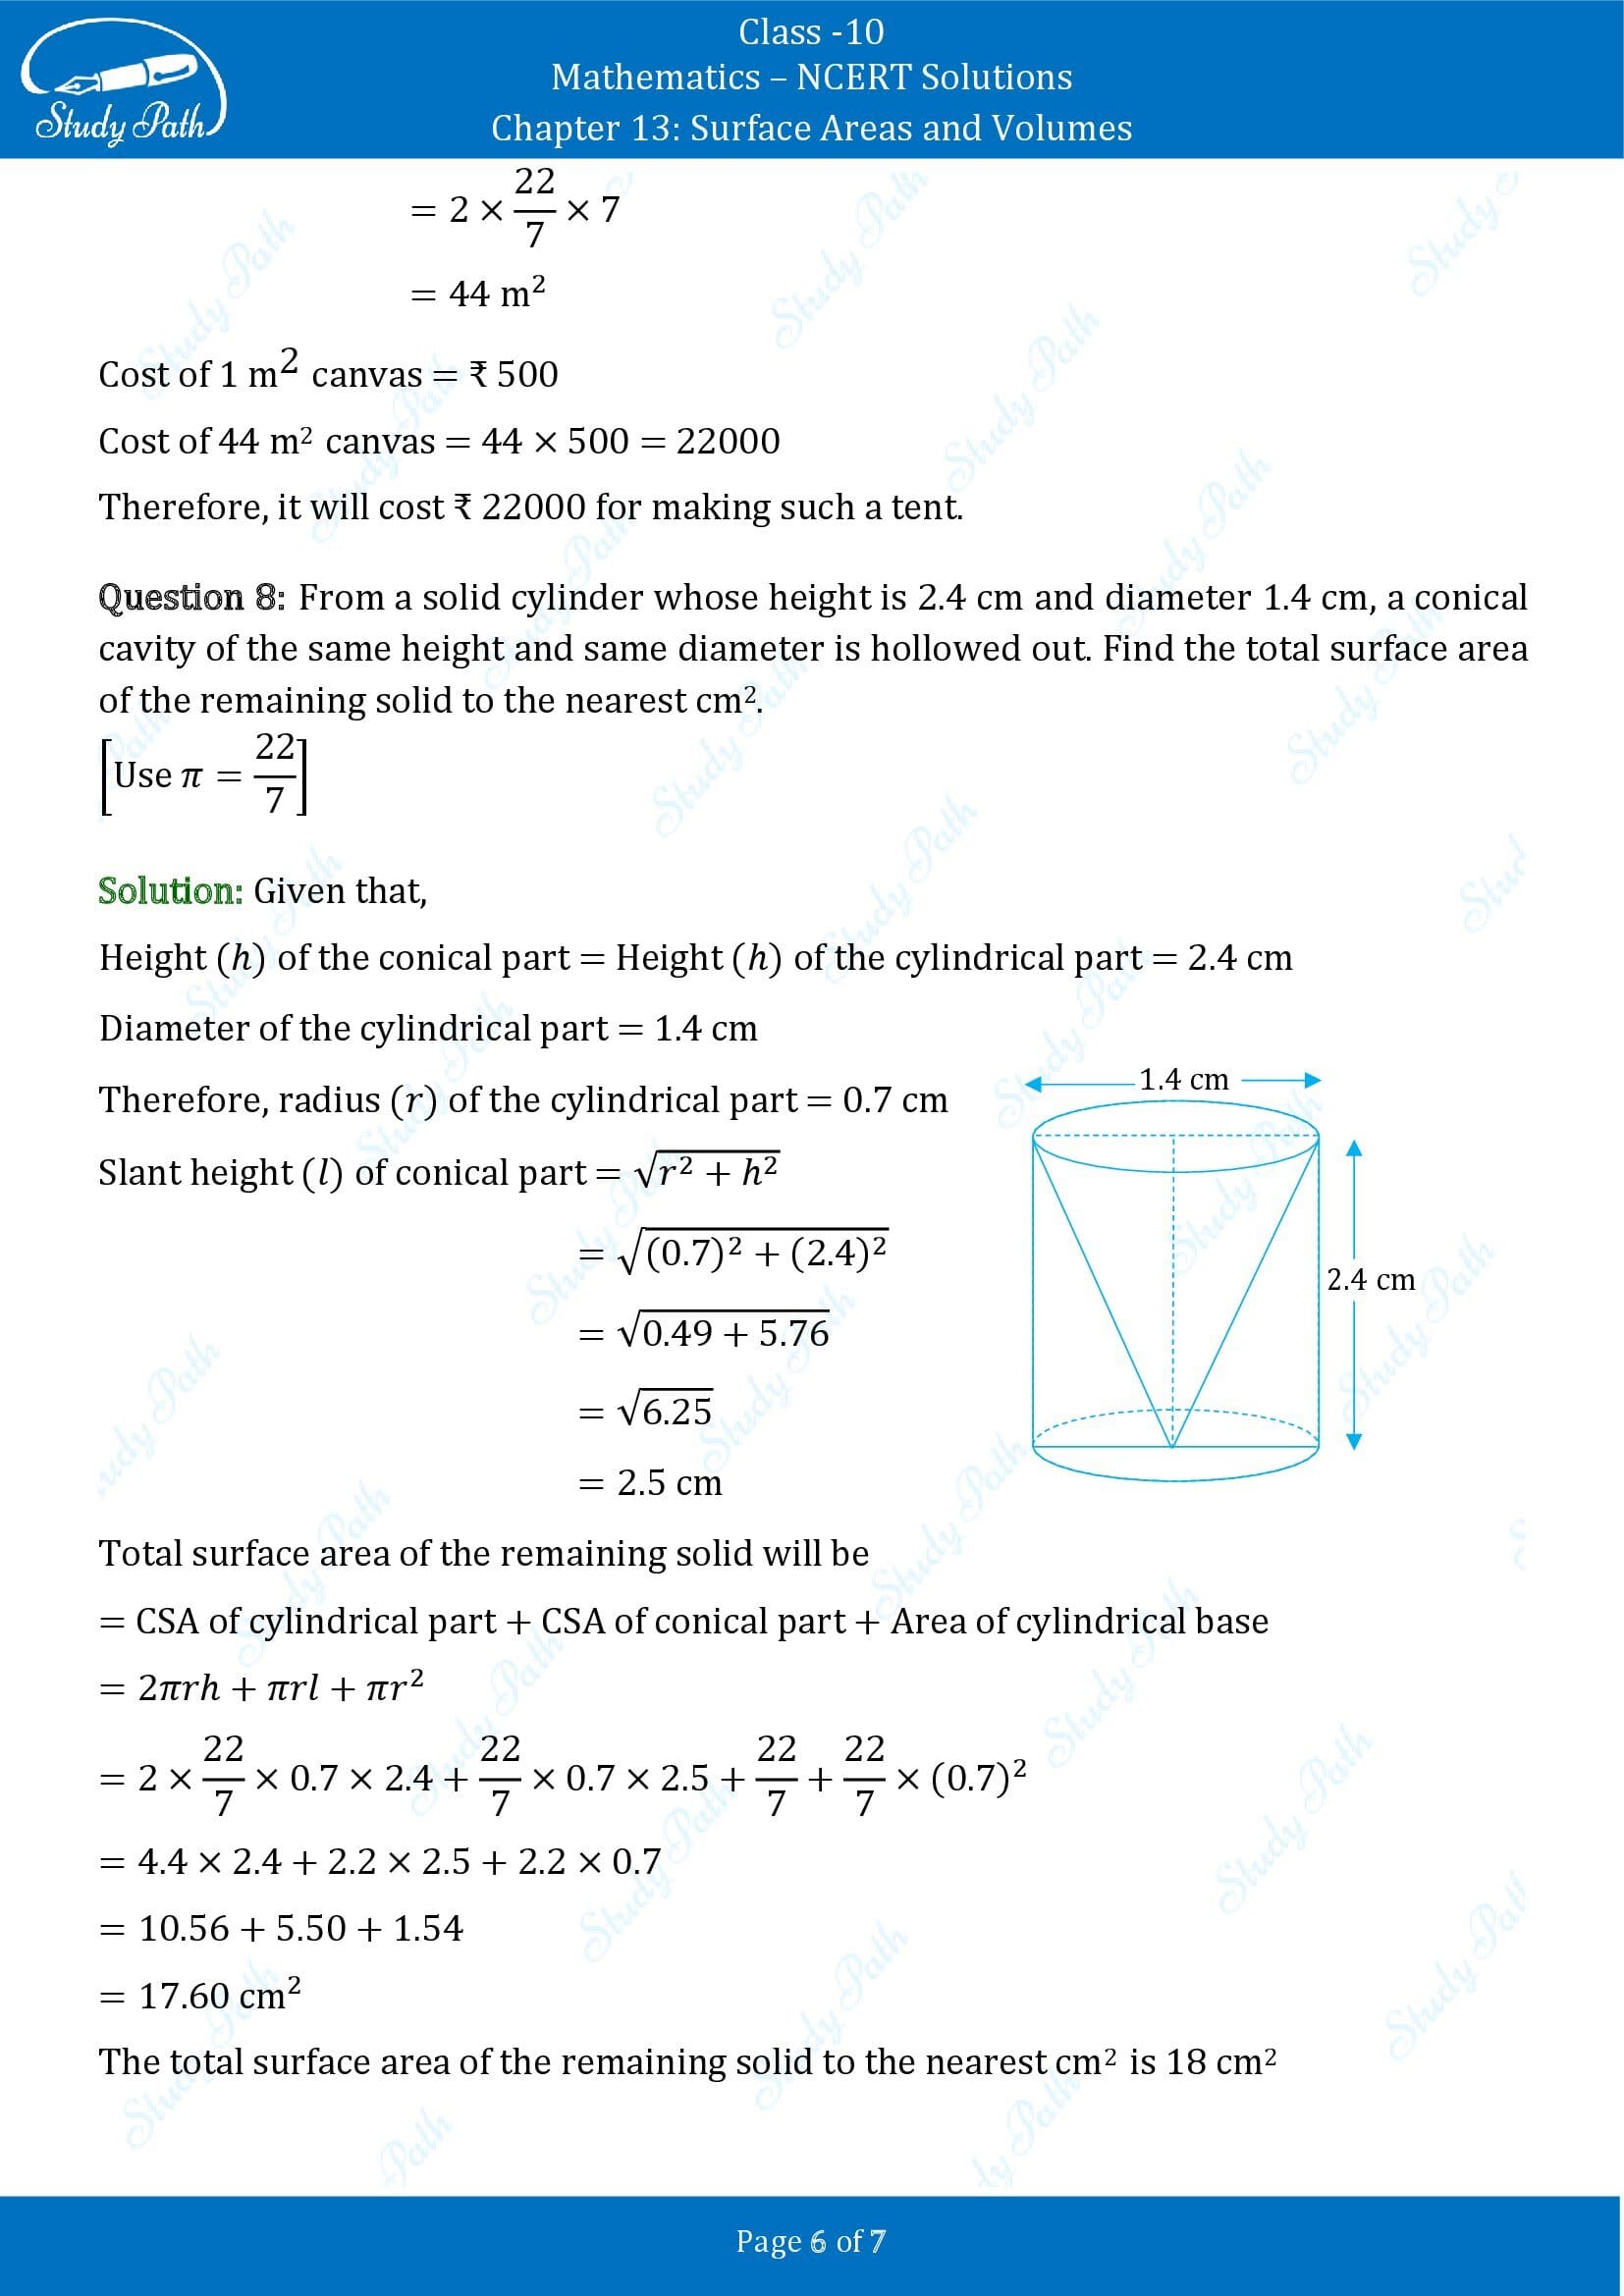 NCERT Solutions for Class 10 Maths Chapter 13 Surface Areas and Volumes Exercise 13.1 00006